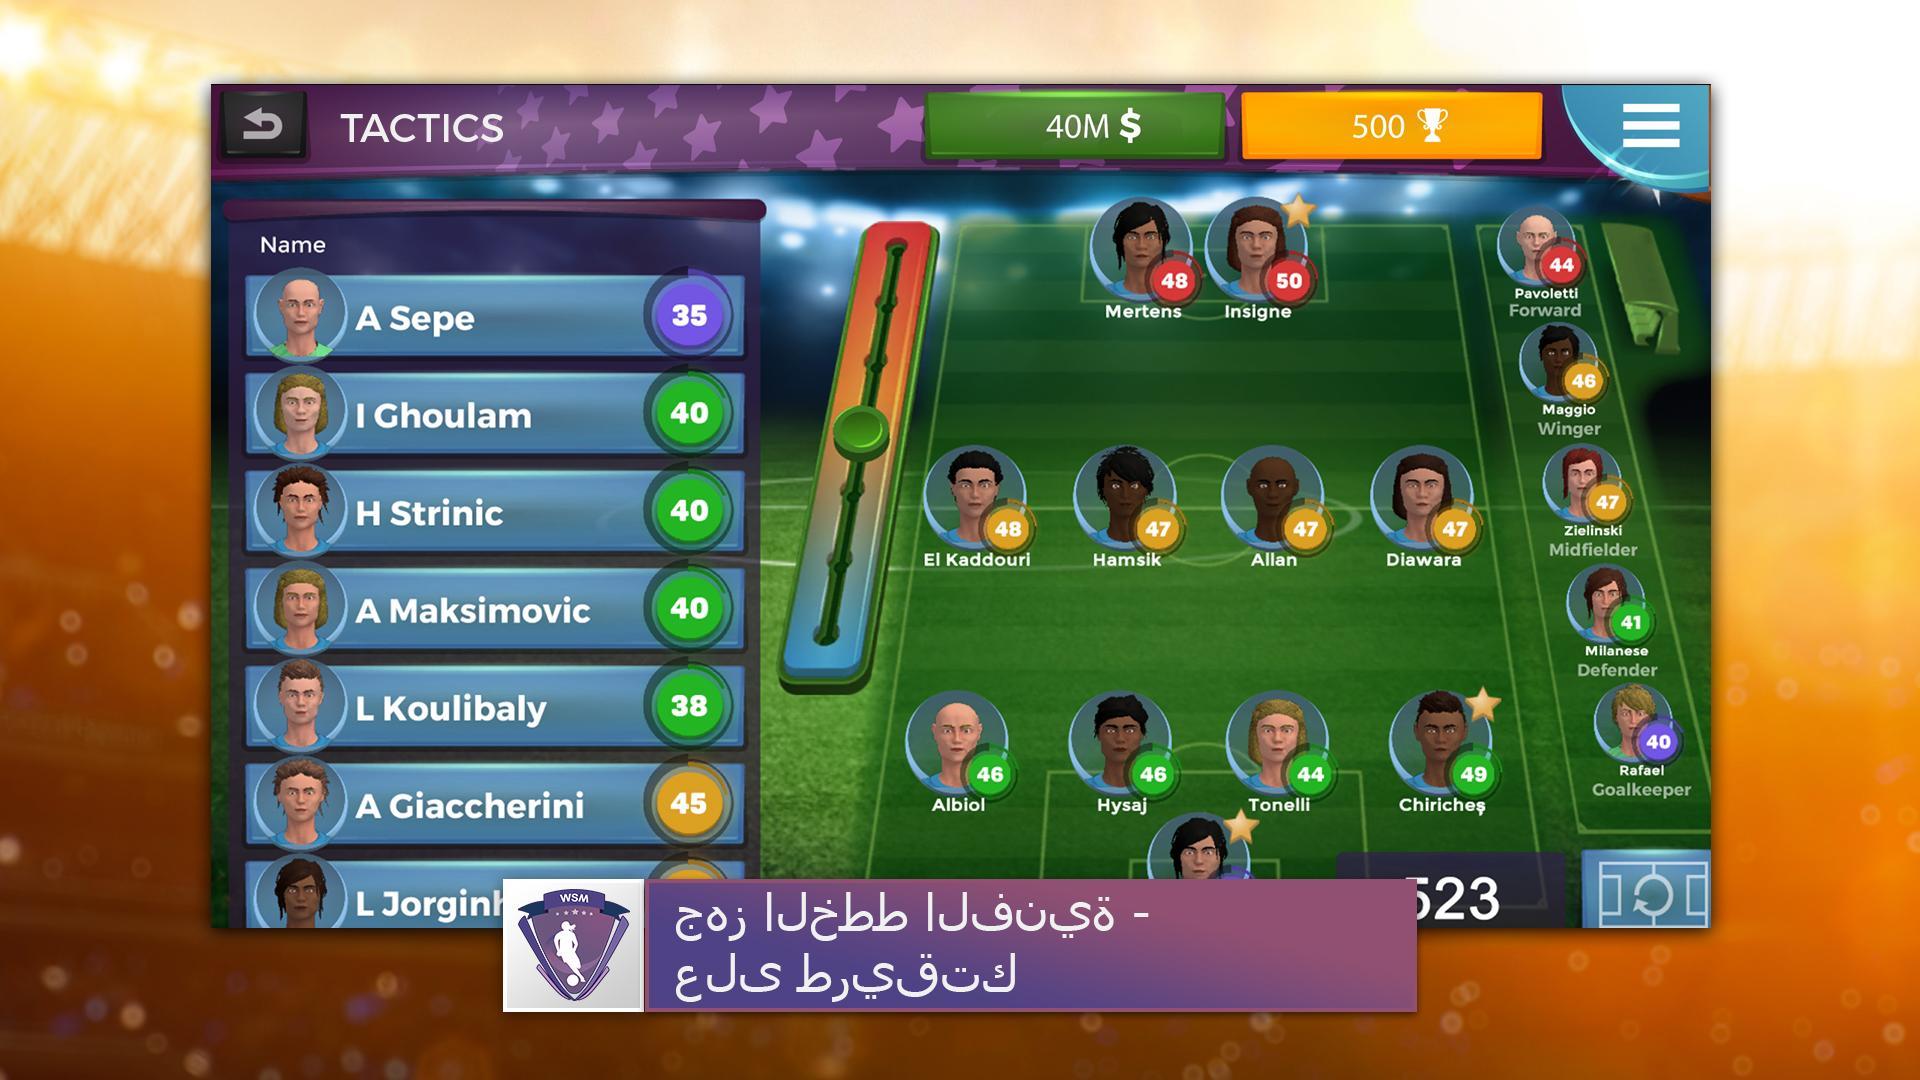 Women's Soccer Manager (WSM) - Football Management for Android - APK  Download